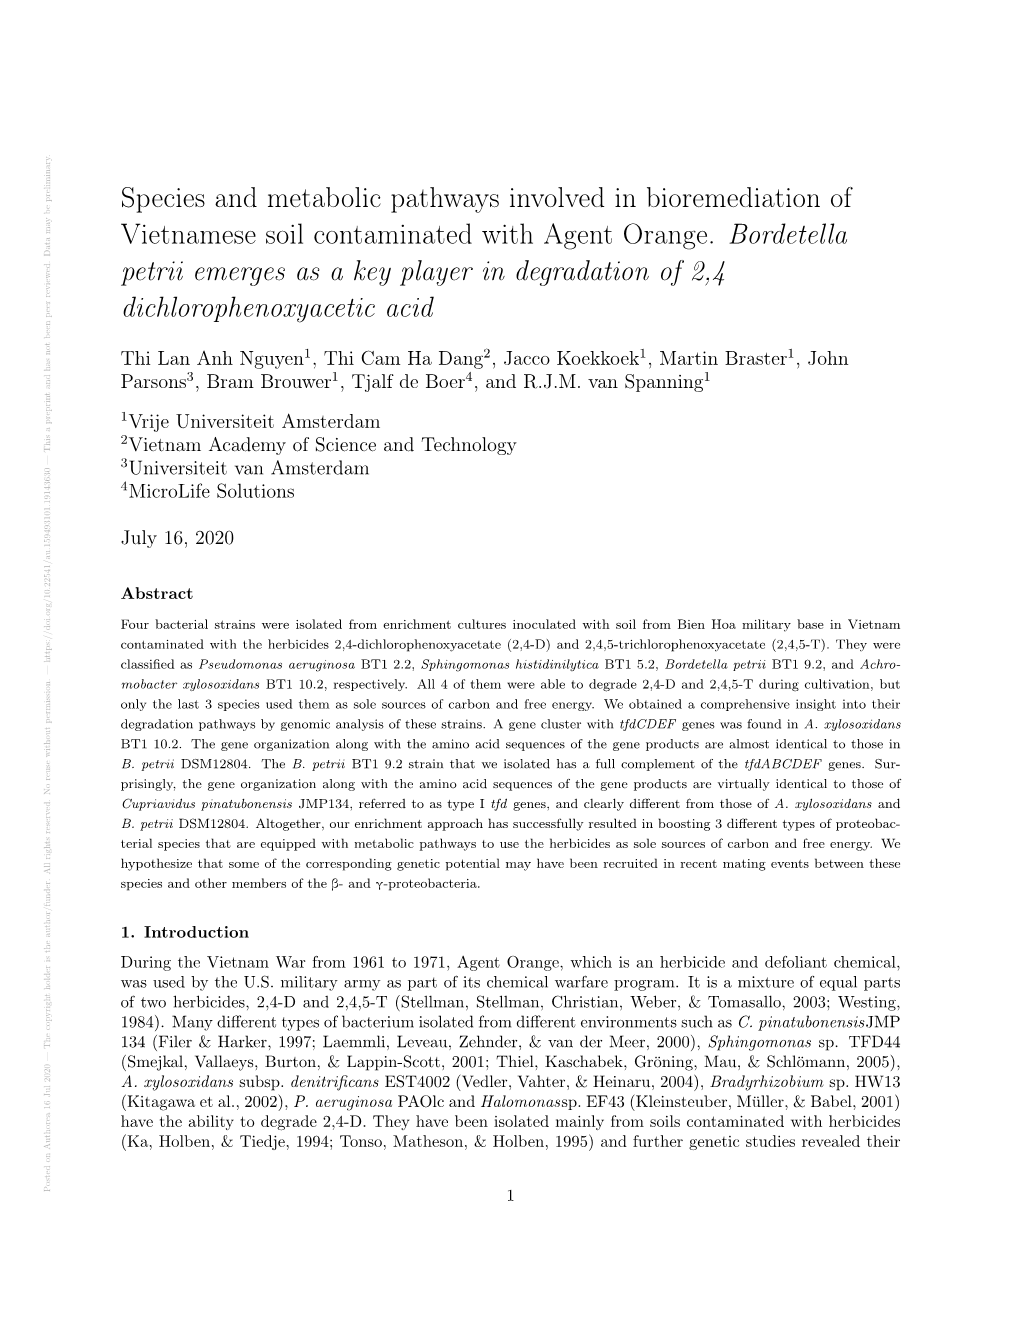 Species and Metabolic Pathways Involved in Bioremediation Of